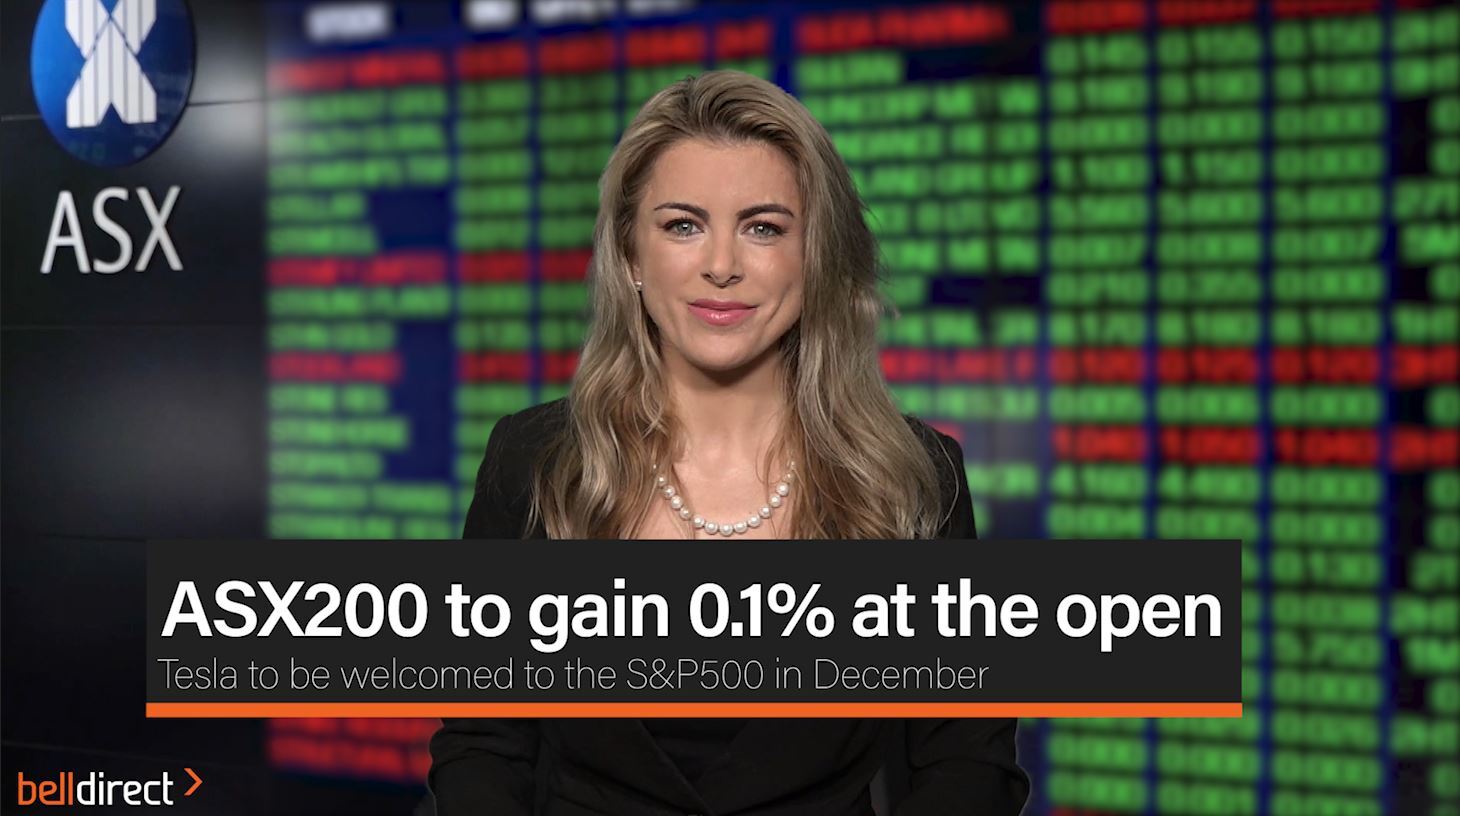 ASX200 to gain 0.1% at the open